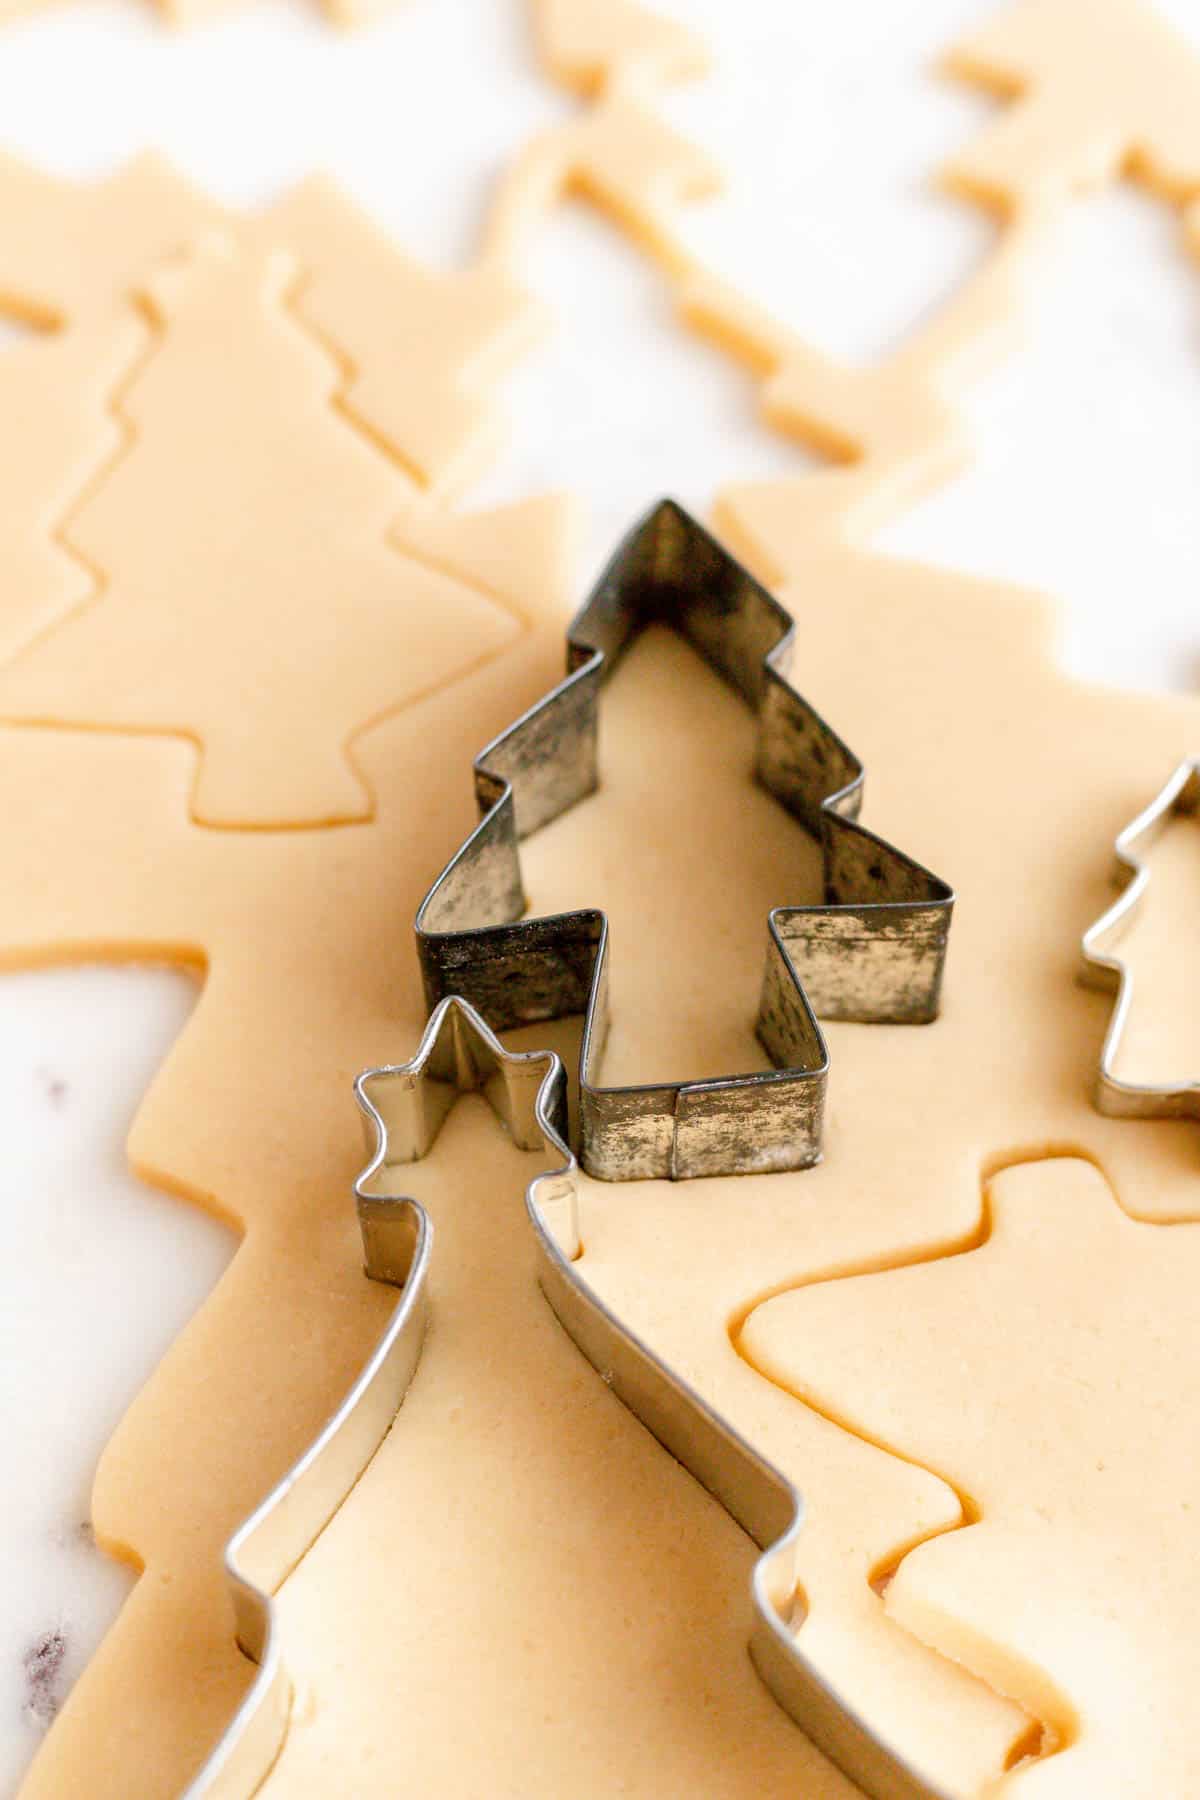 An antique Christmas cookie cutter stuck in cookie dough with other trees cut out around it